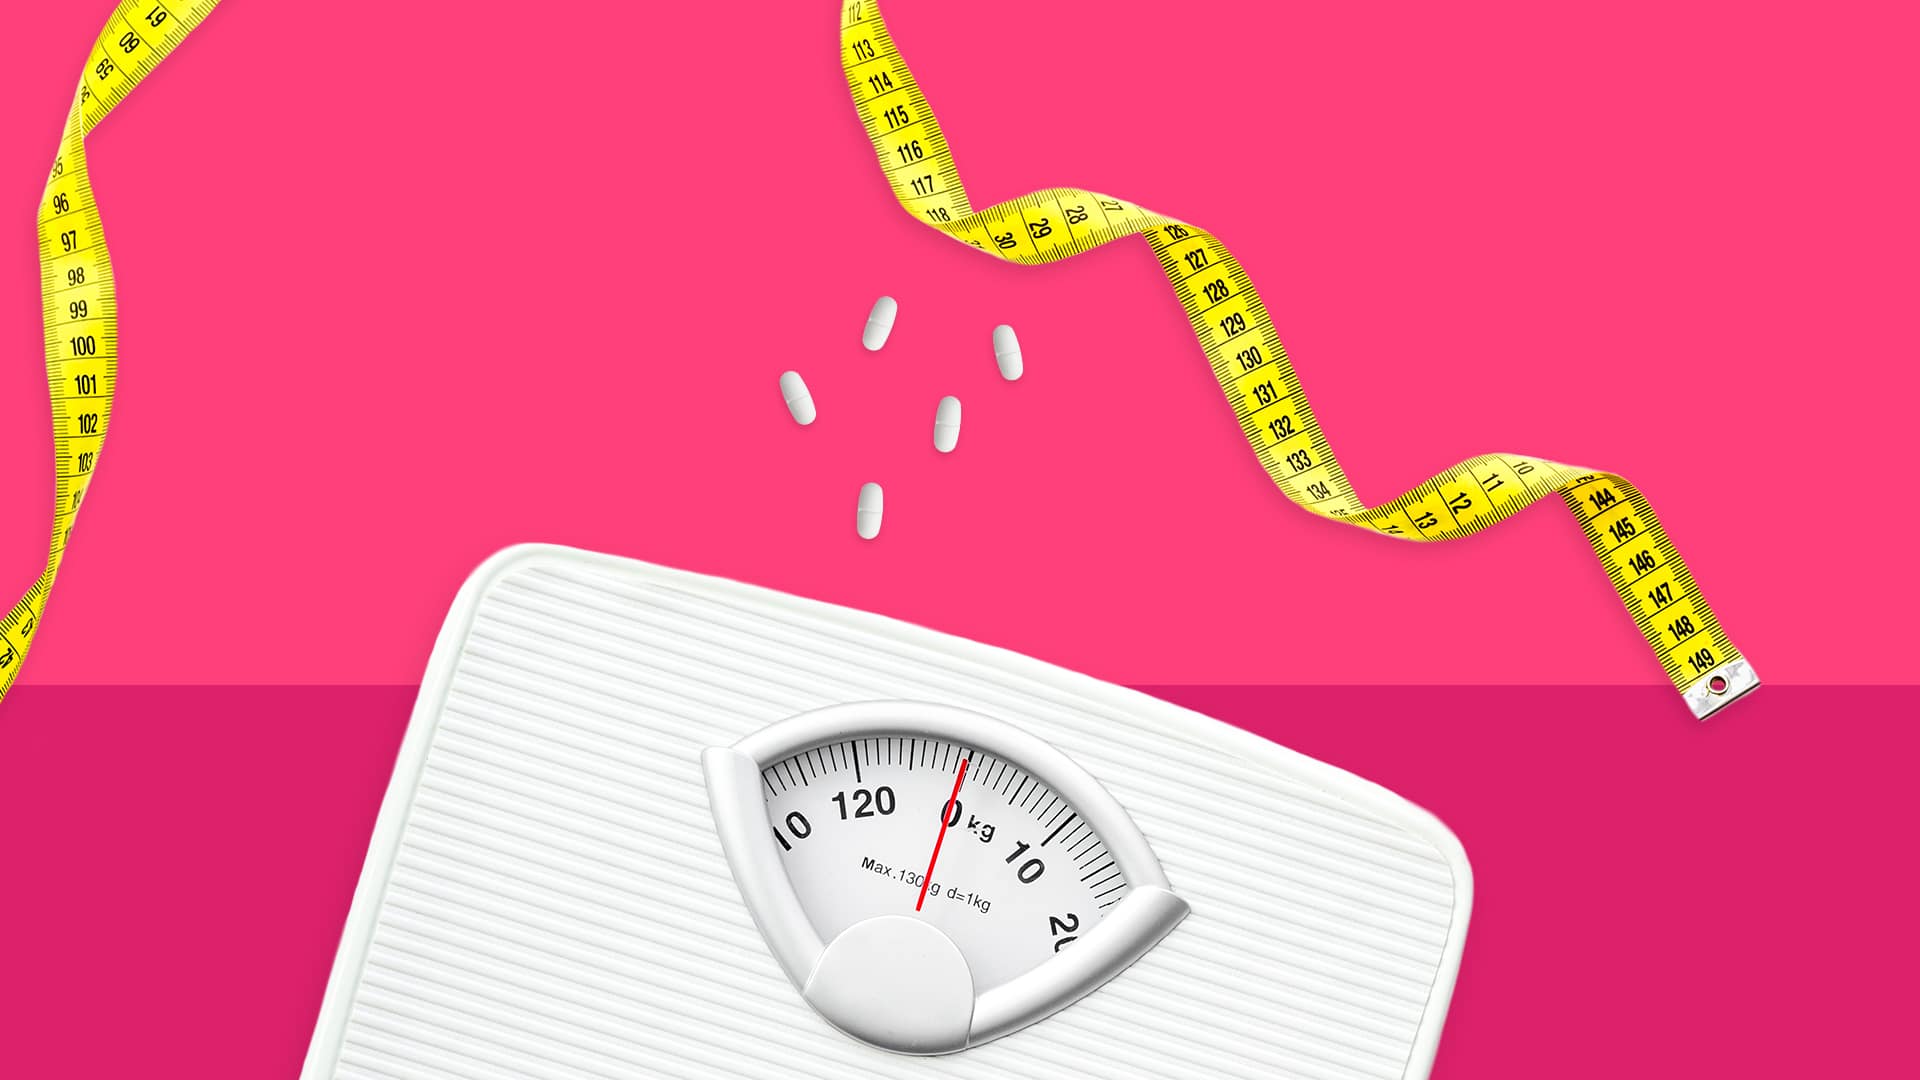 A pink background featuring a weight scale and a measuring tape, along with an informative section about "What is Phentermine?